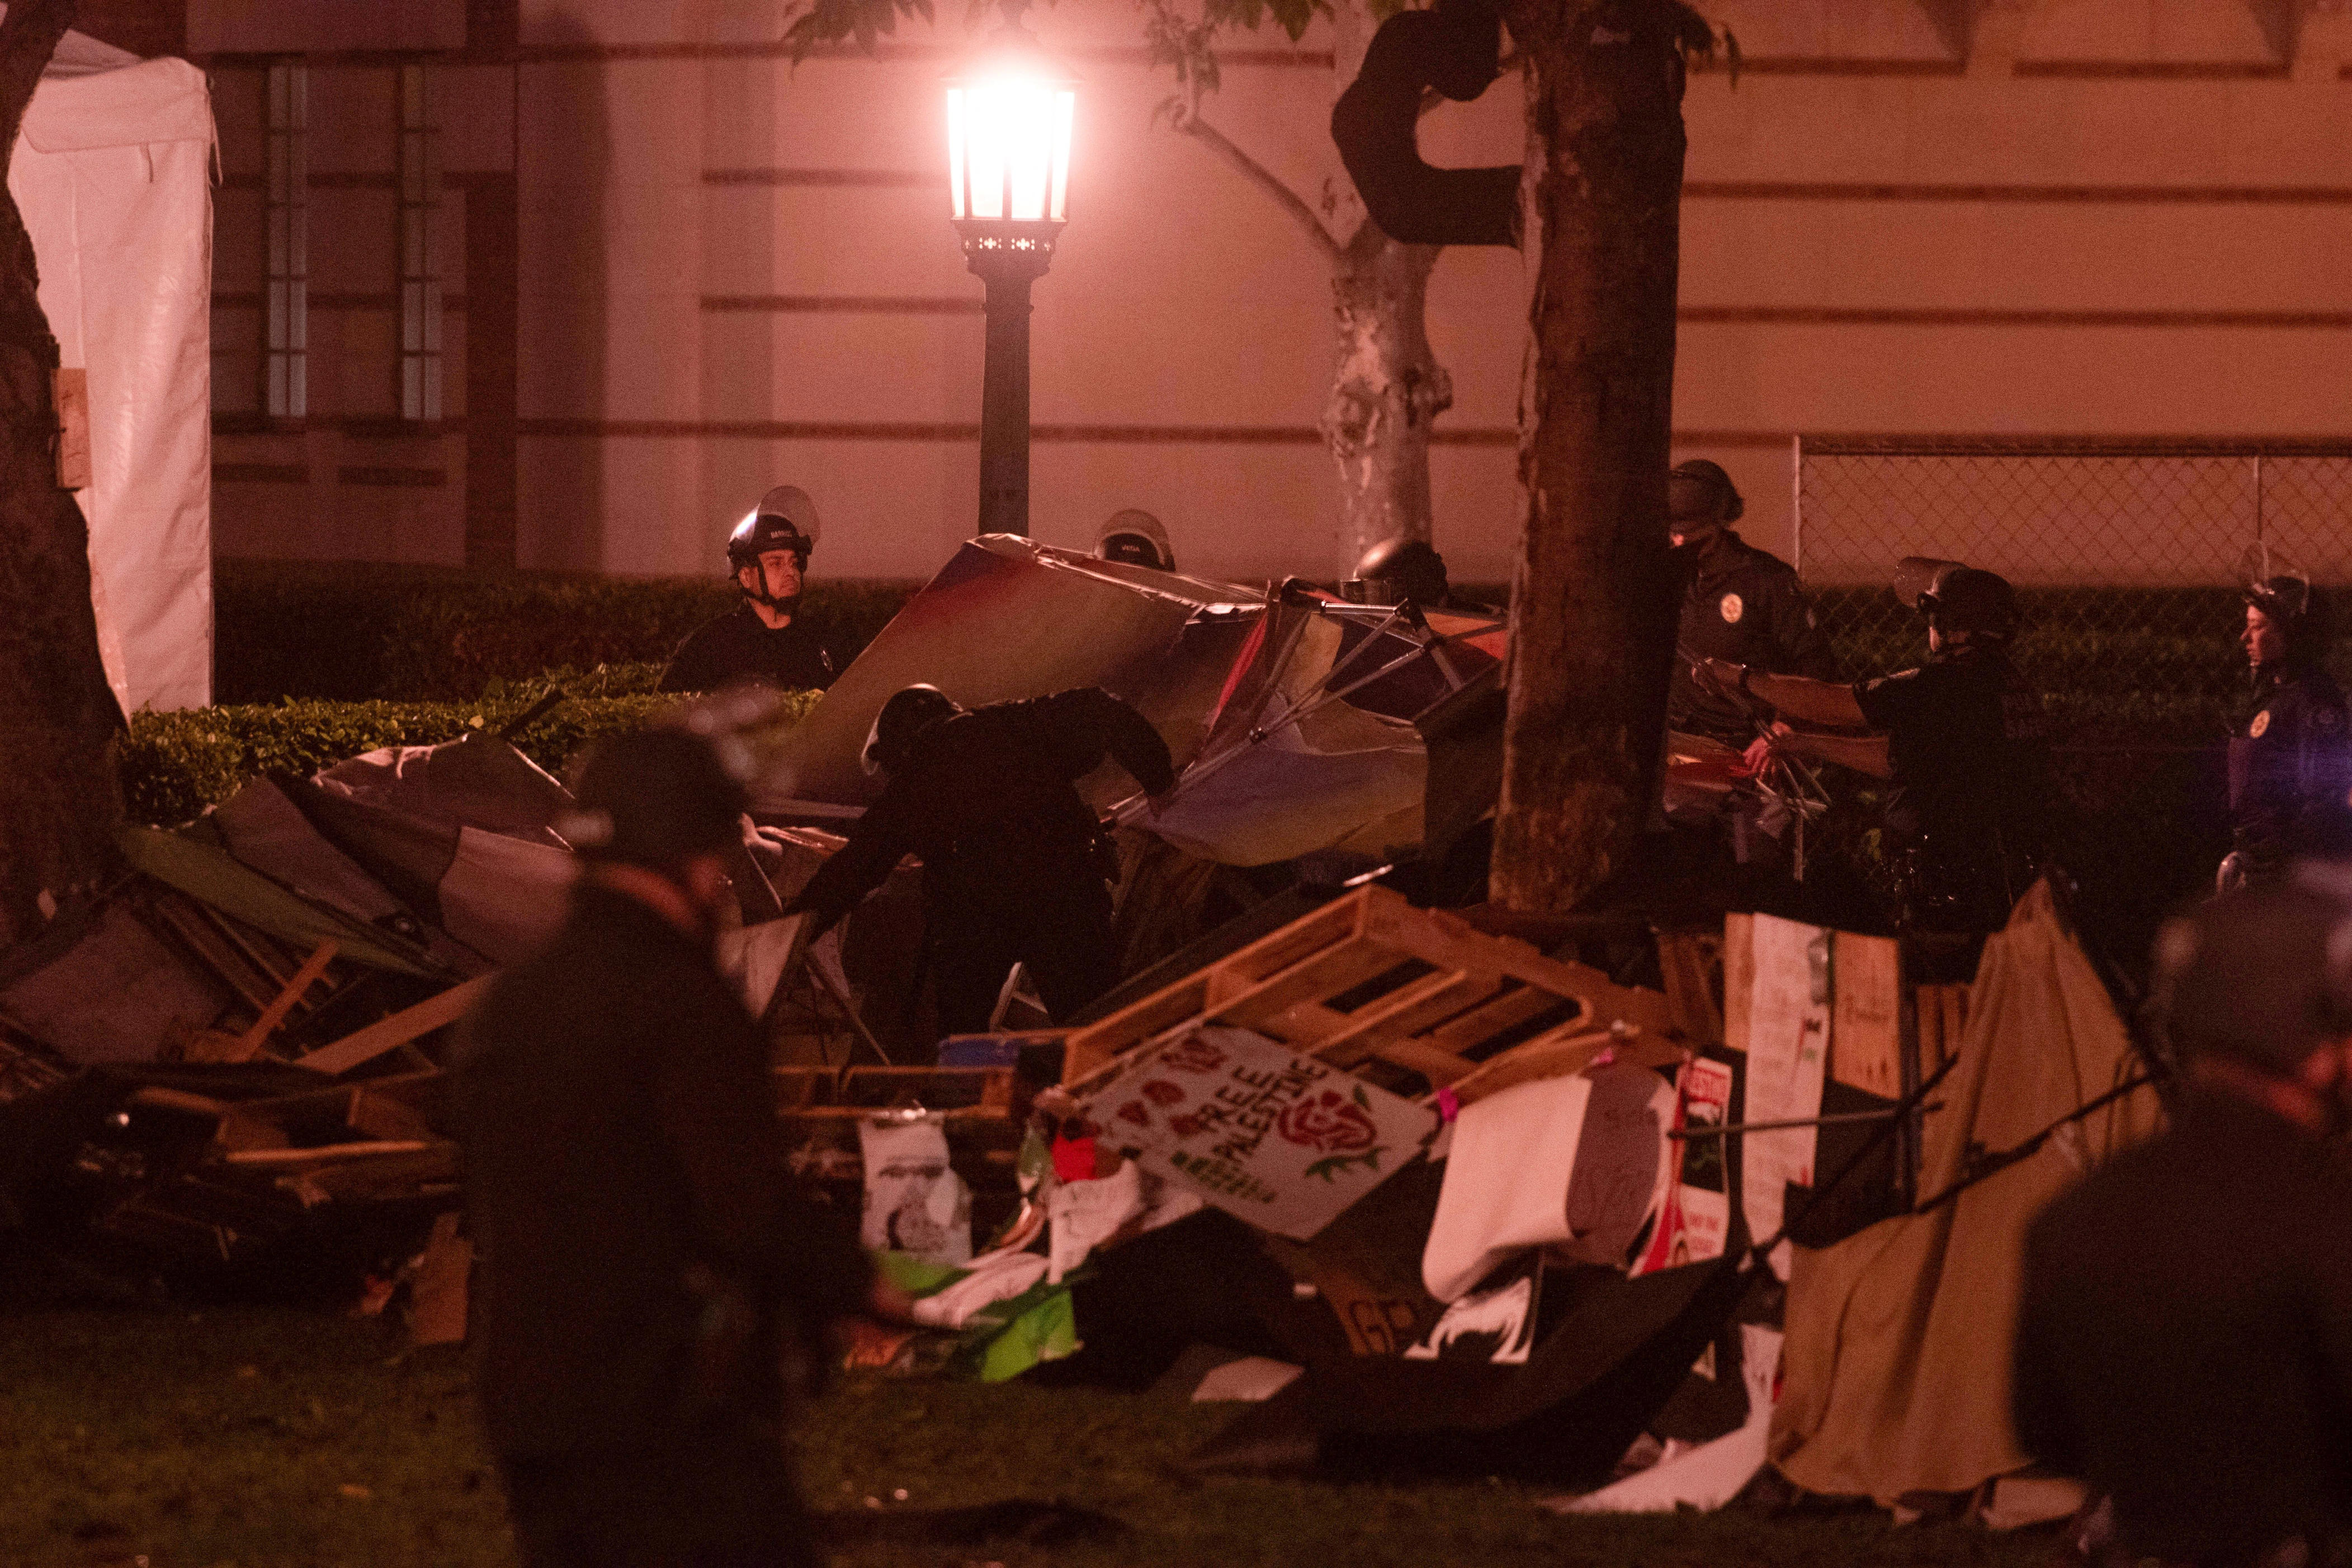 police close pro-palestinian encampment at usc; ucla creates new campus safety office: updates